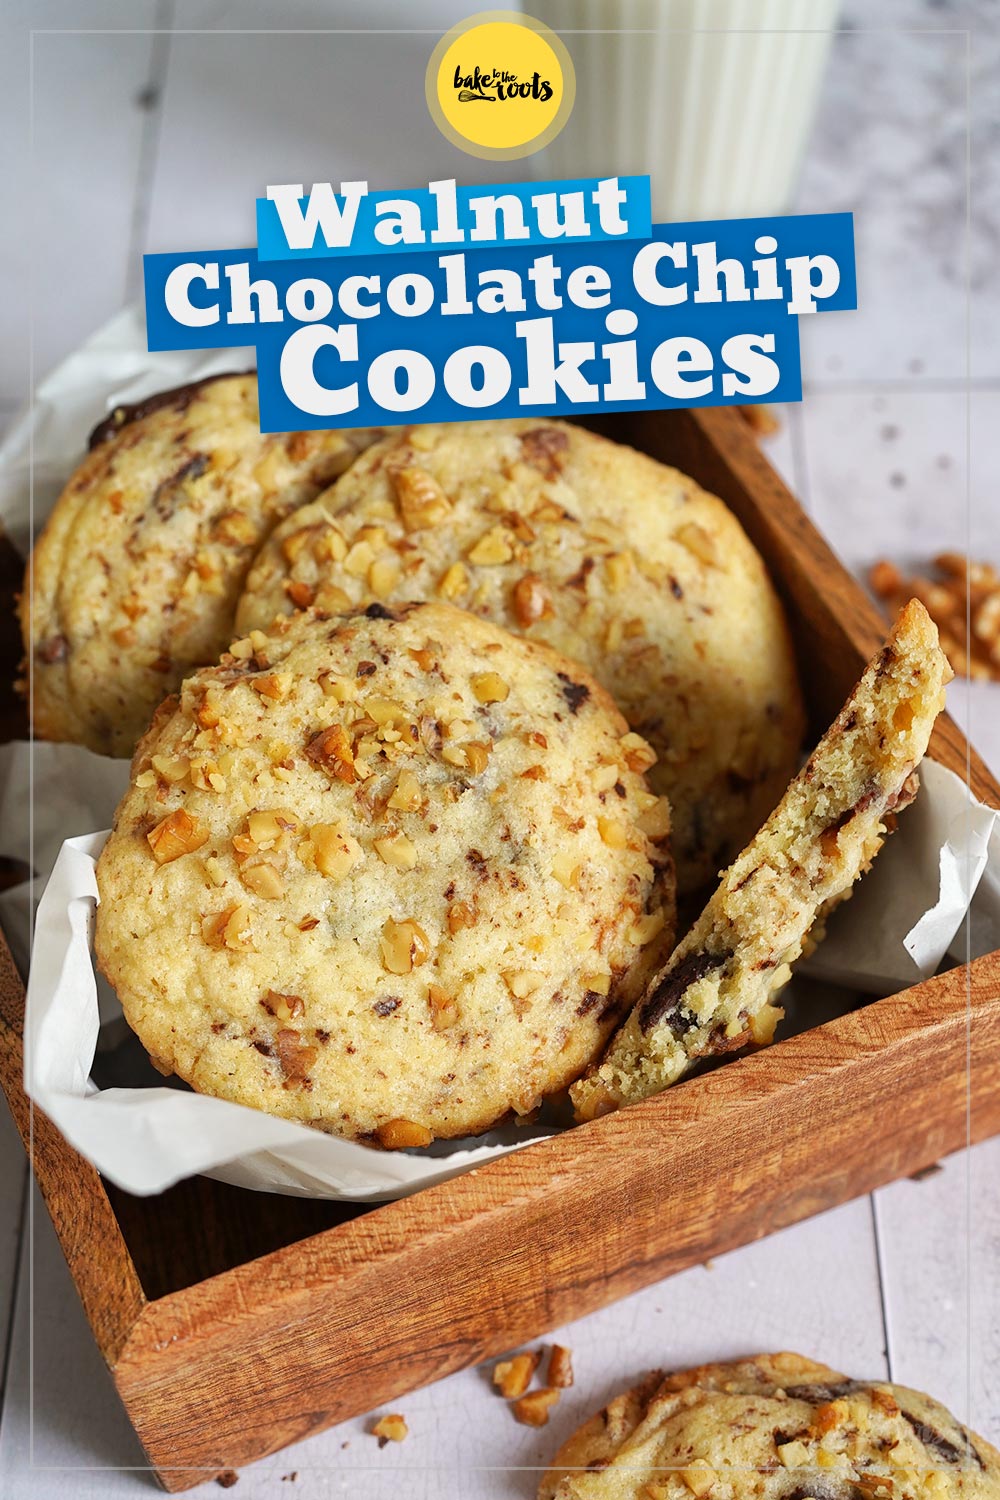 Walnut Chocolate Chip Cookies | Bake to the roots